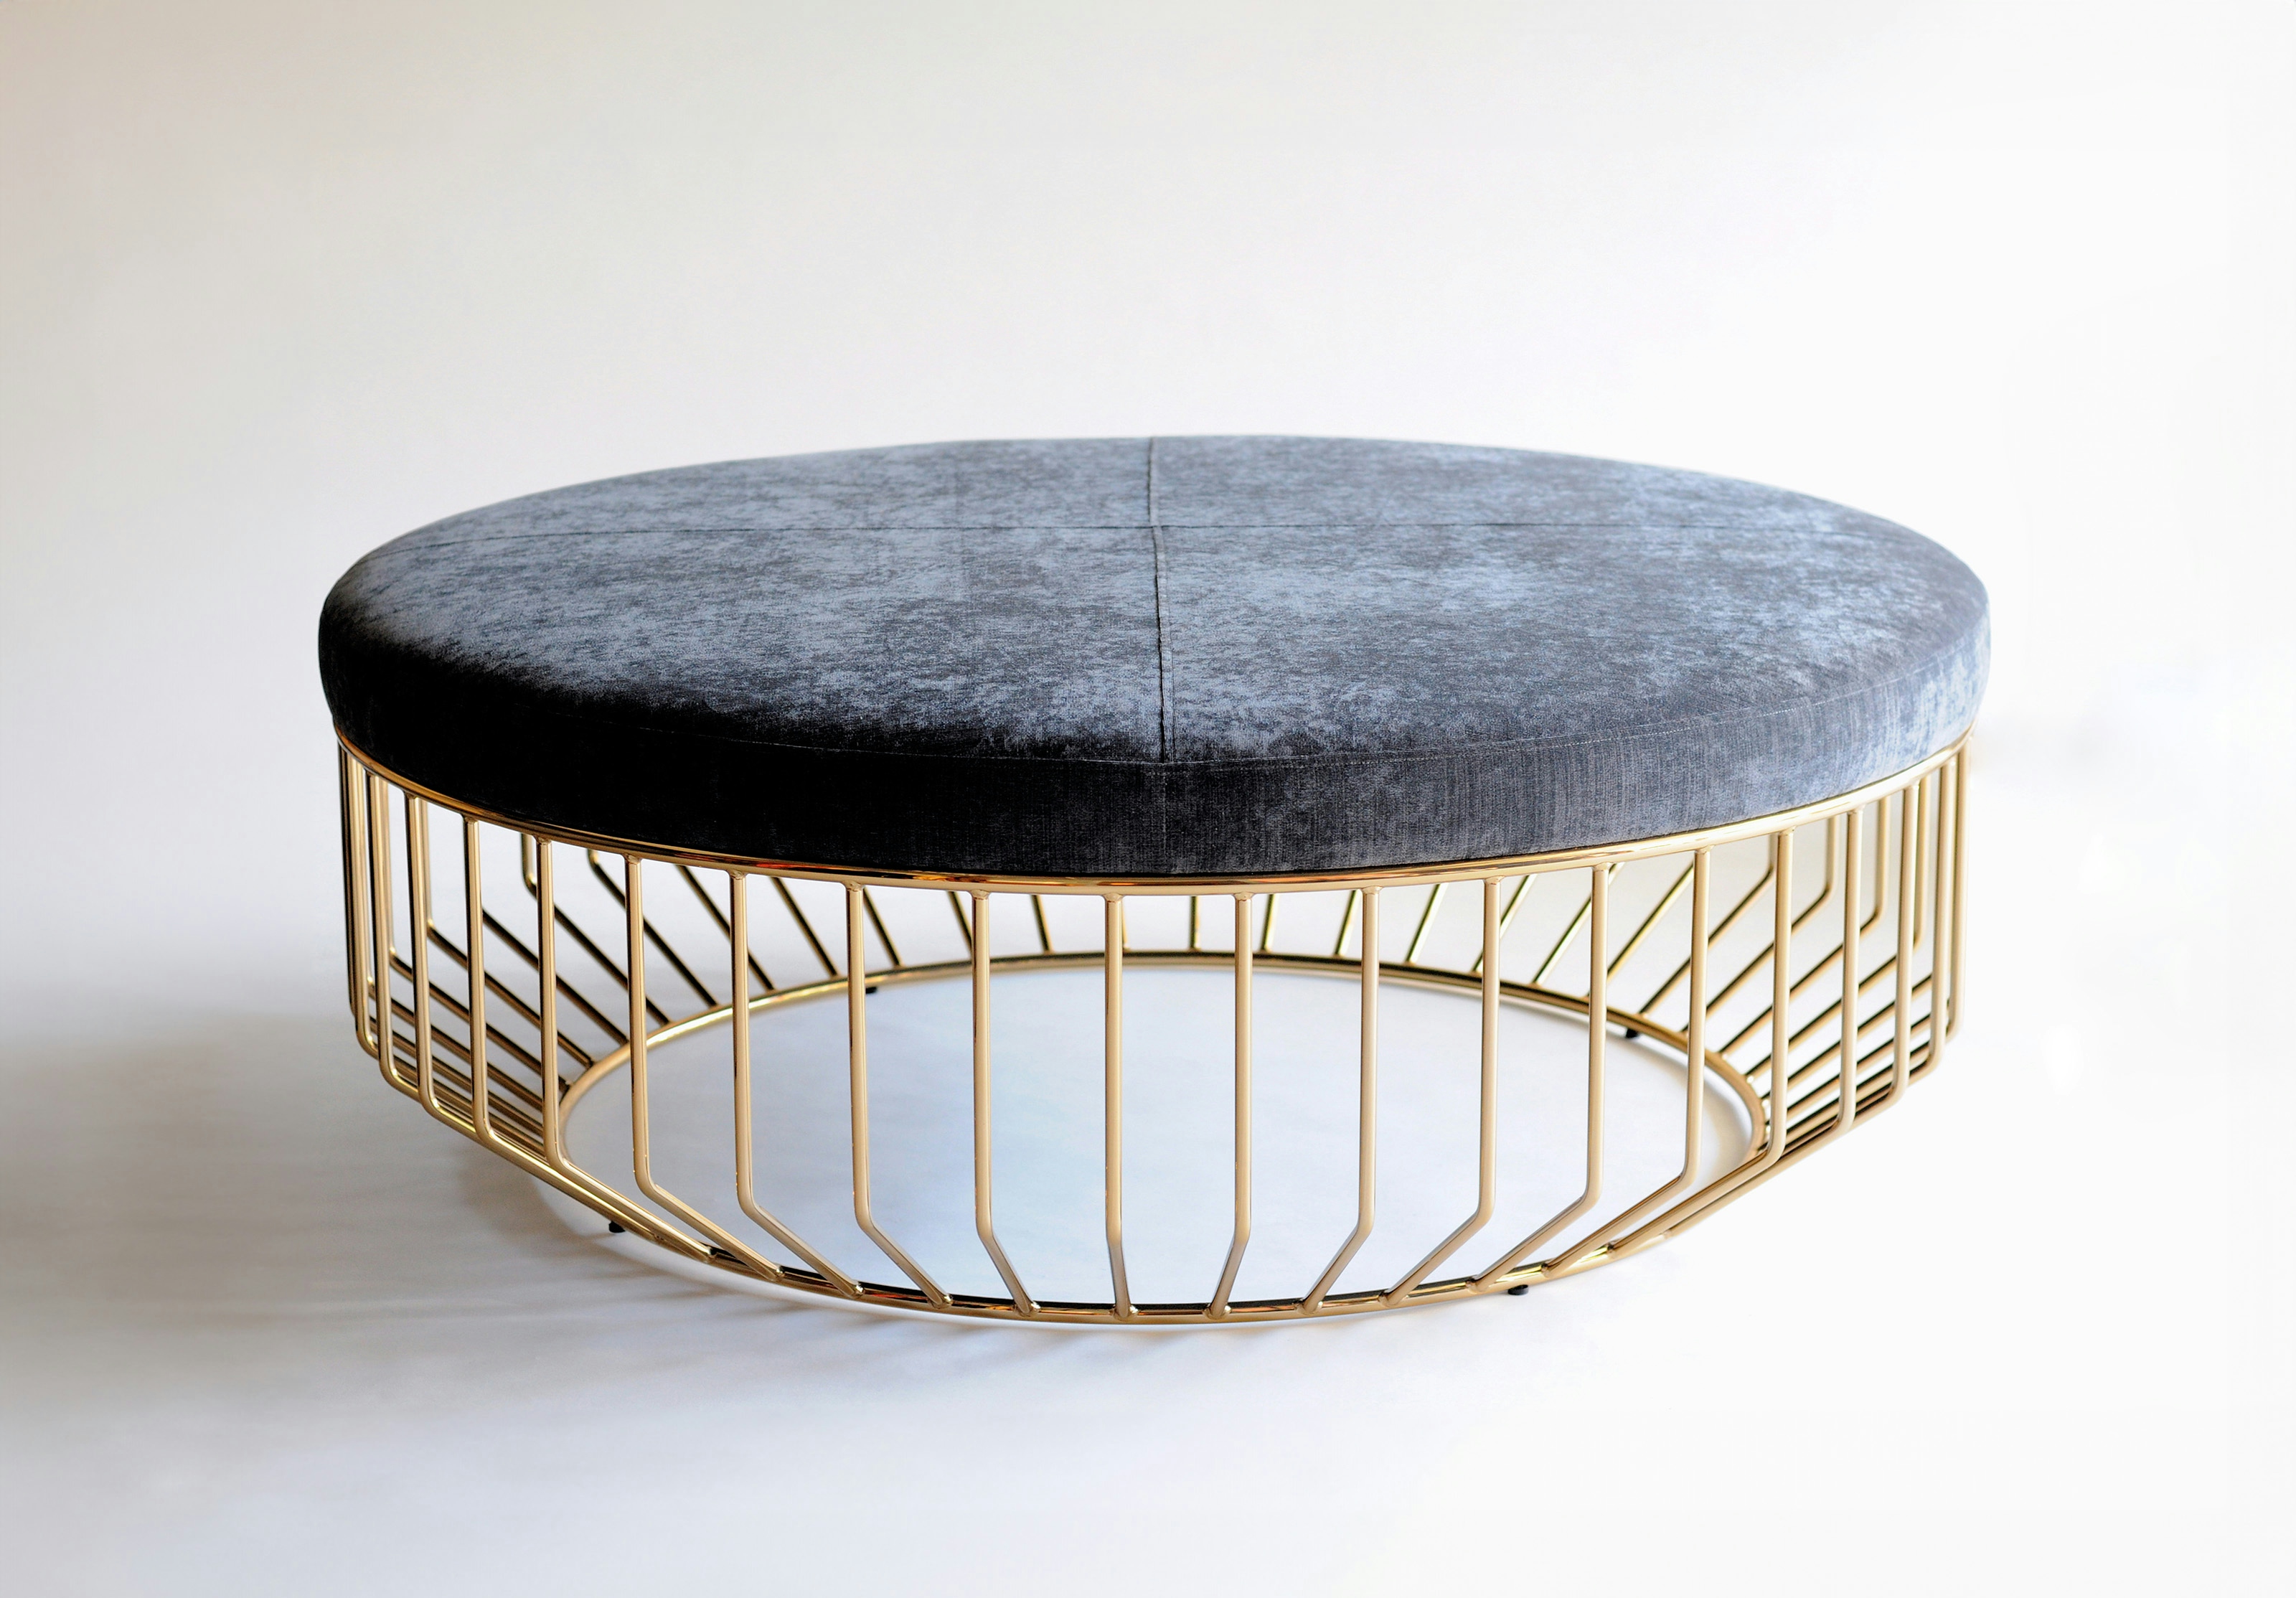 Phase Design Wired Ottoman 1 Product Page Web